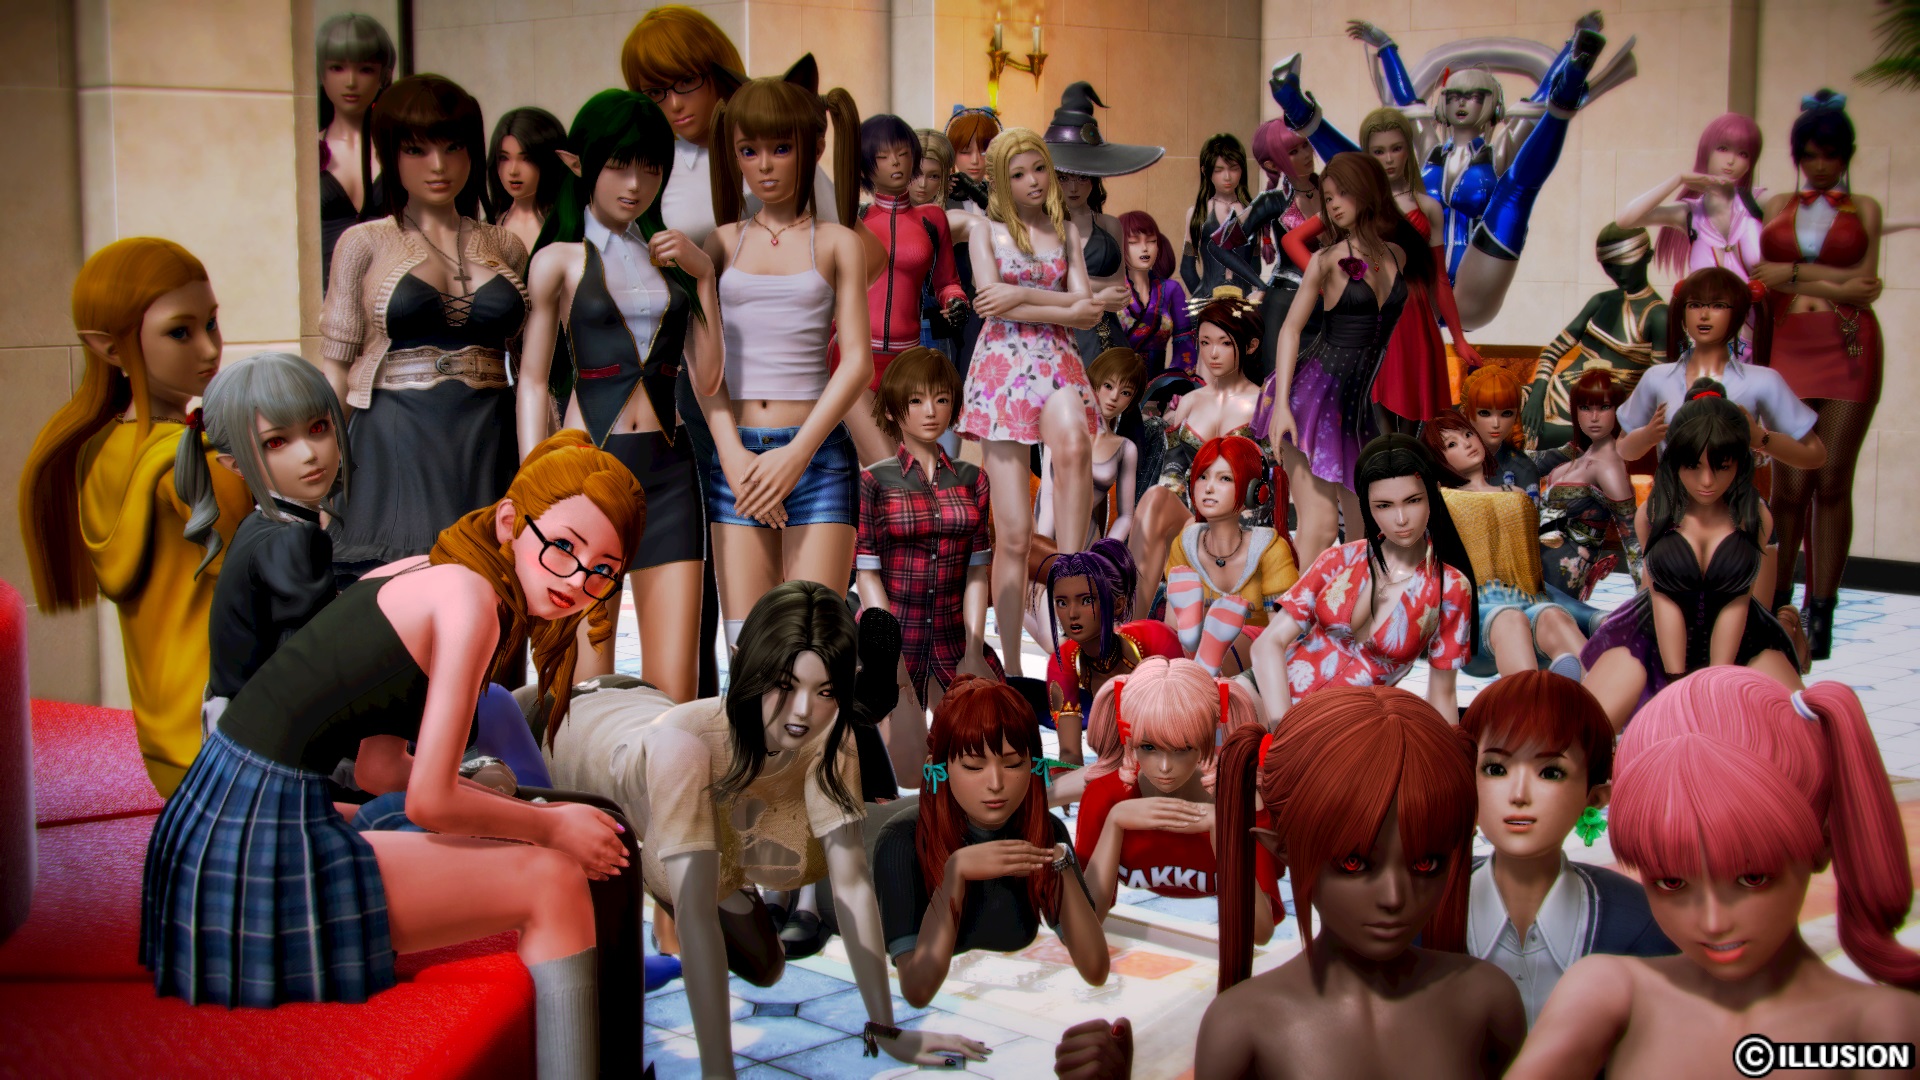 Honey Select Character Share